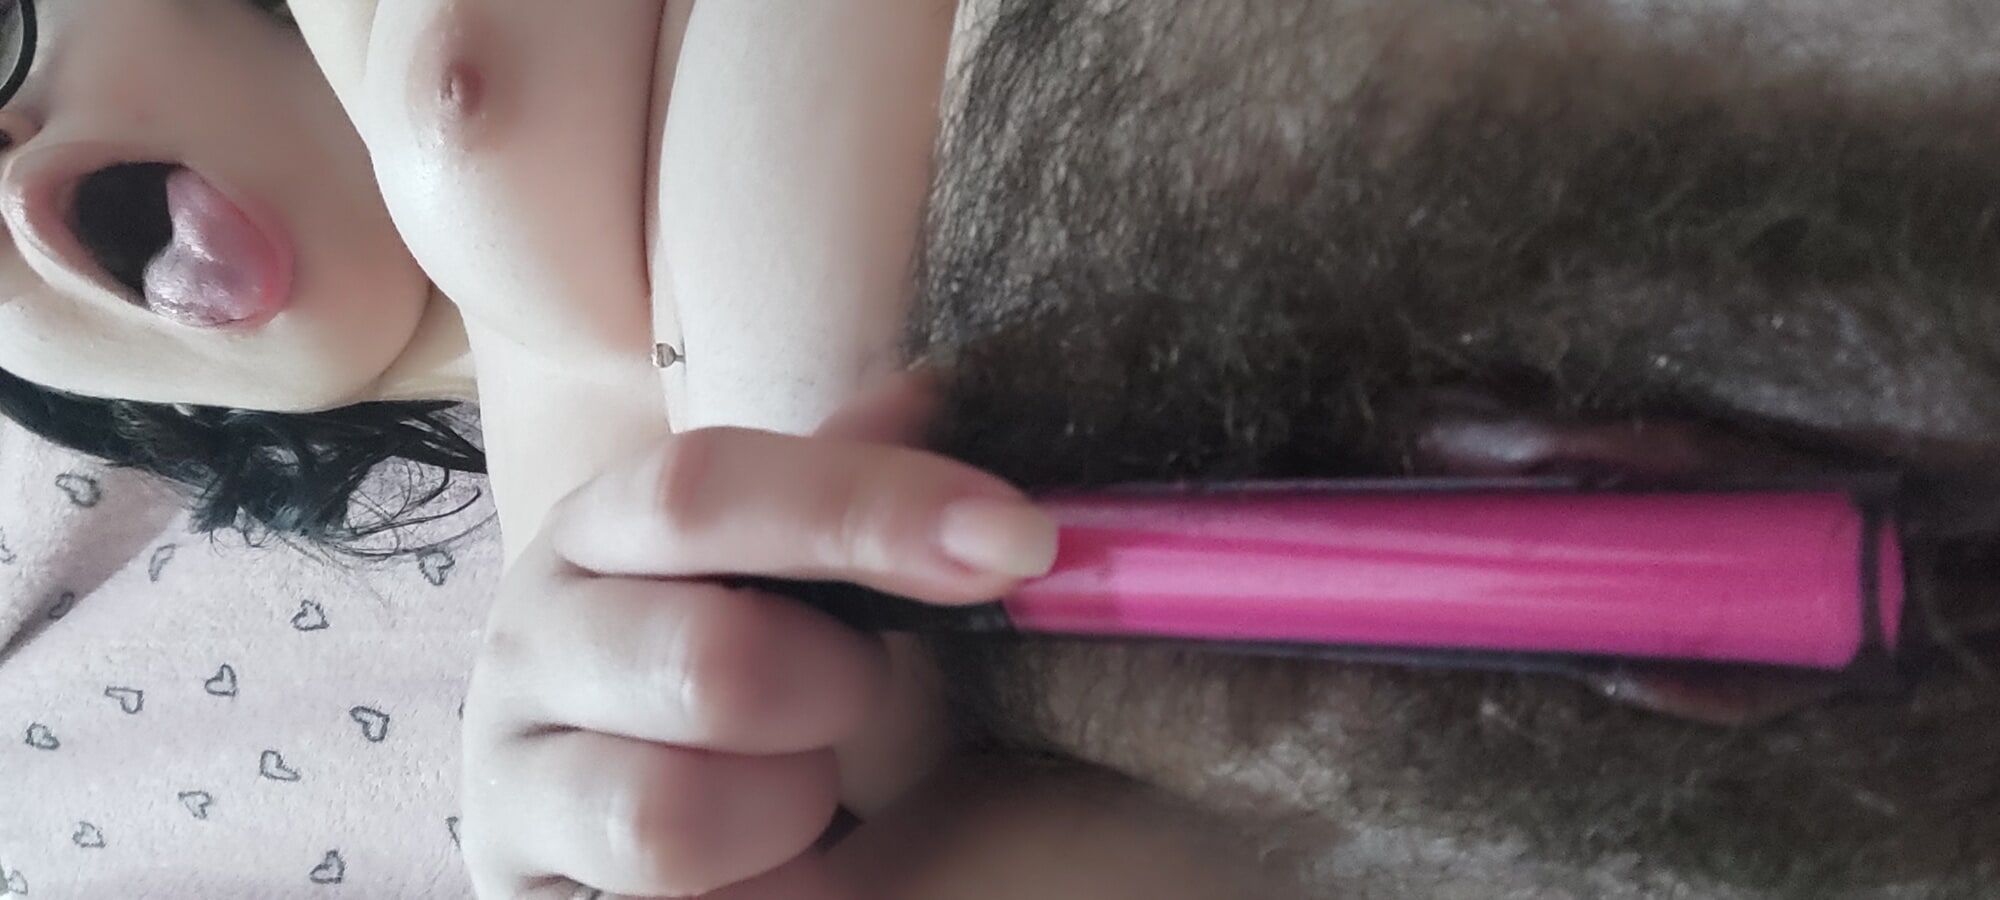 A beautiful hairy pussy #2